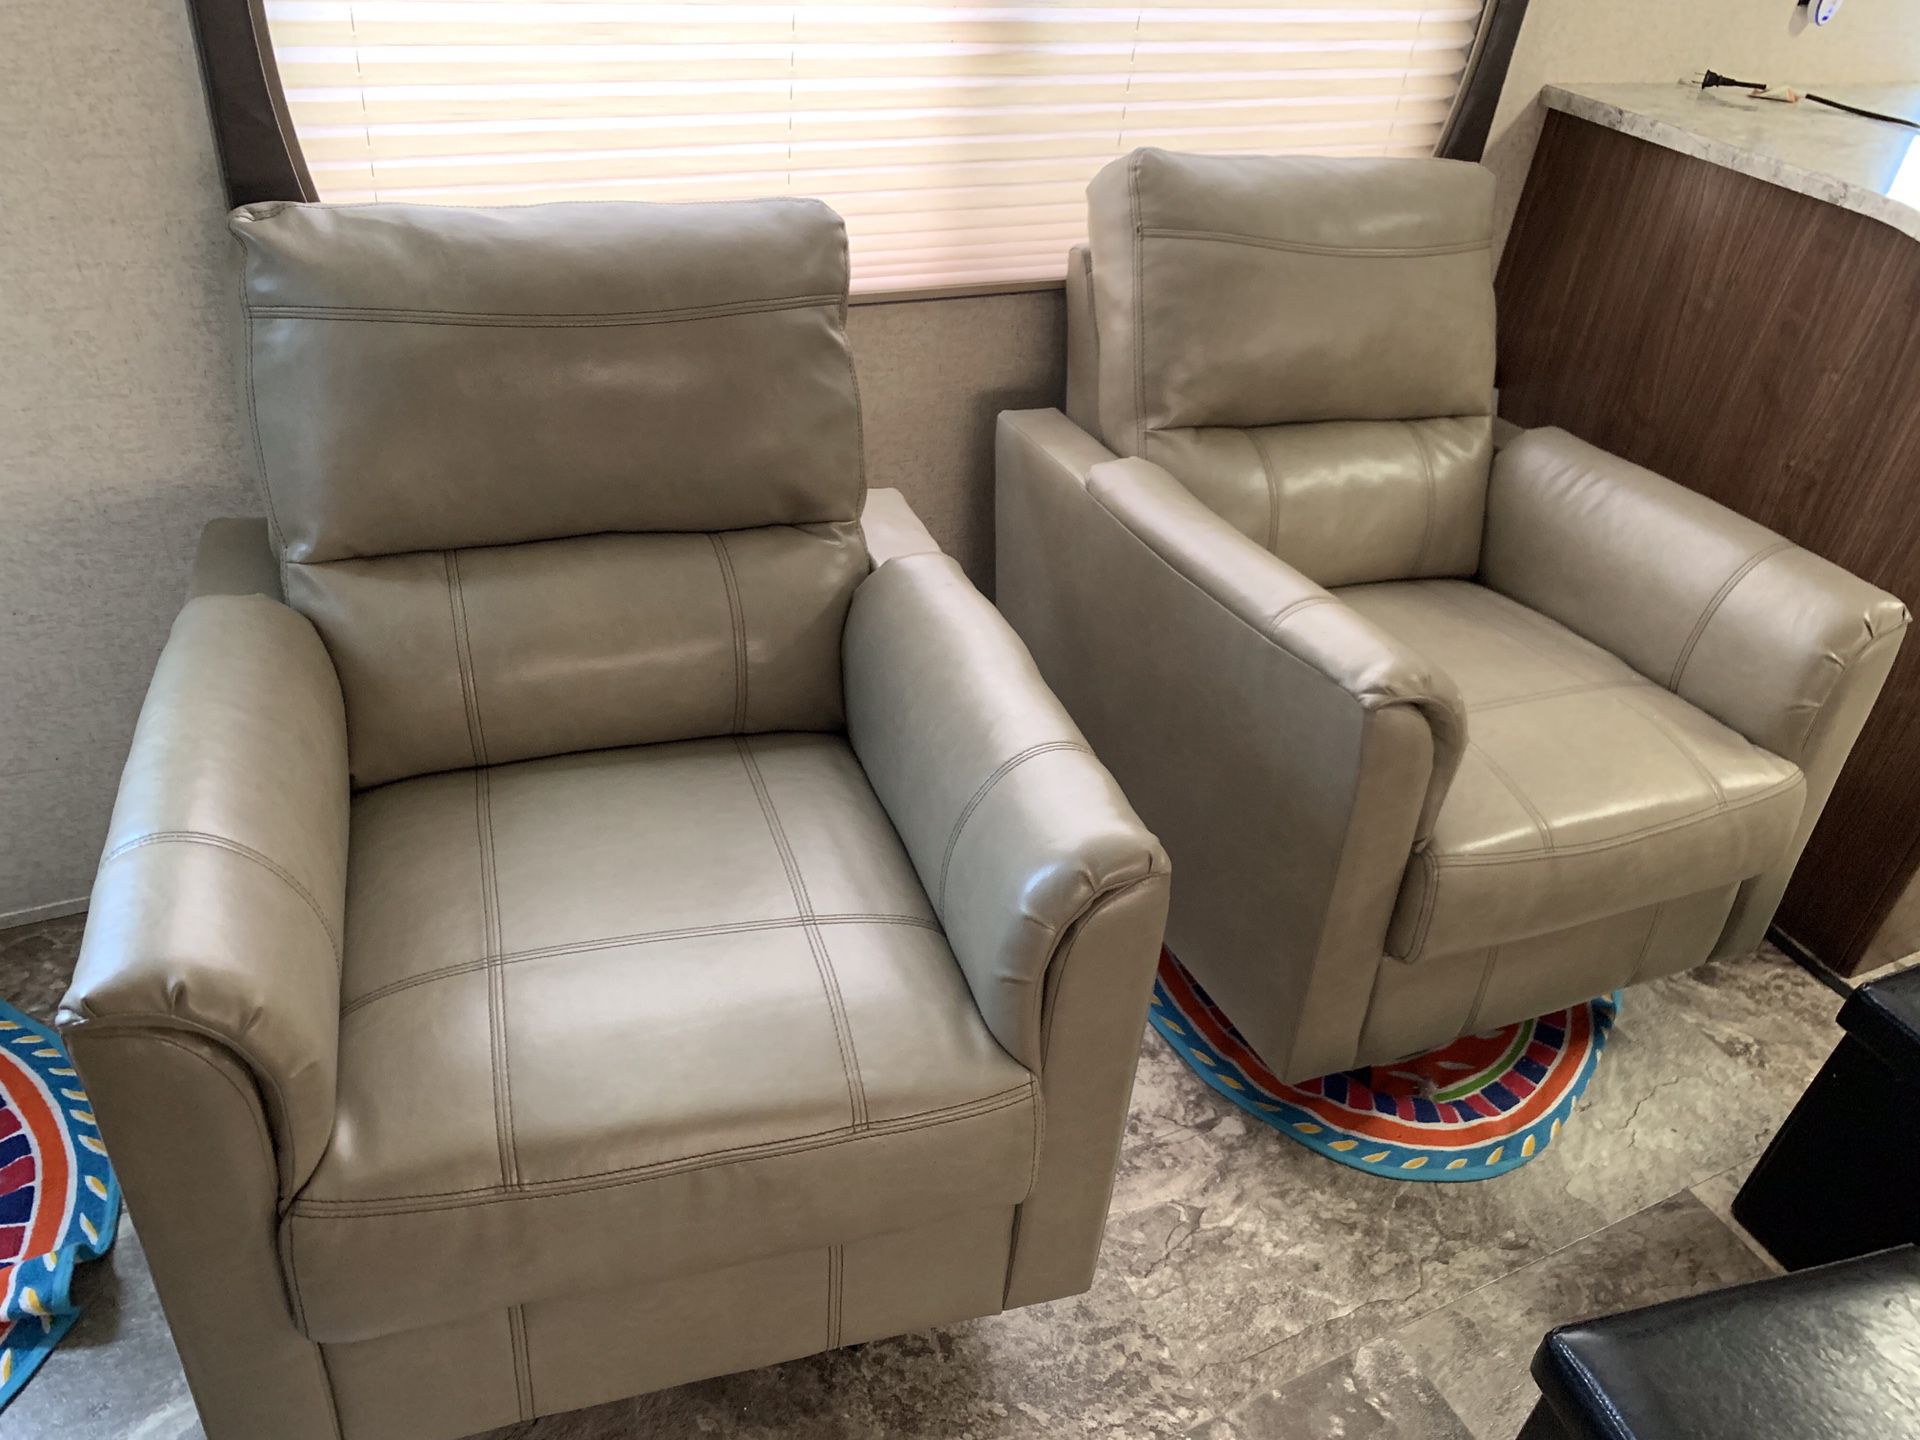 Swivel rocker chairs out of travel trailer these are Not recliners